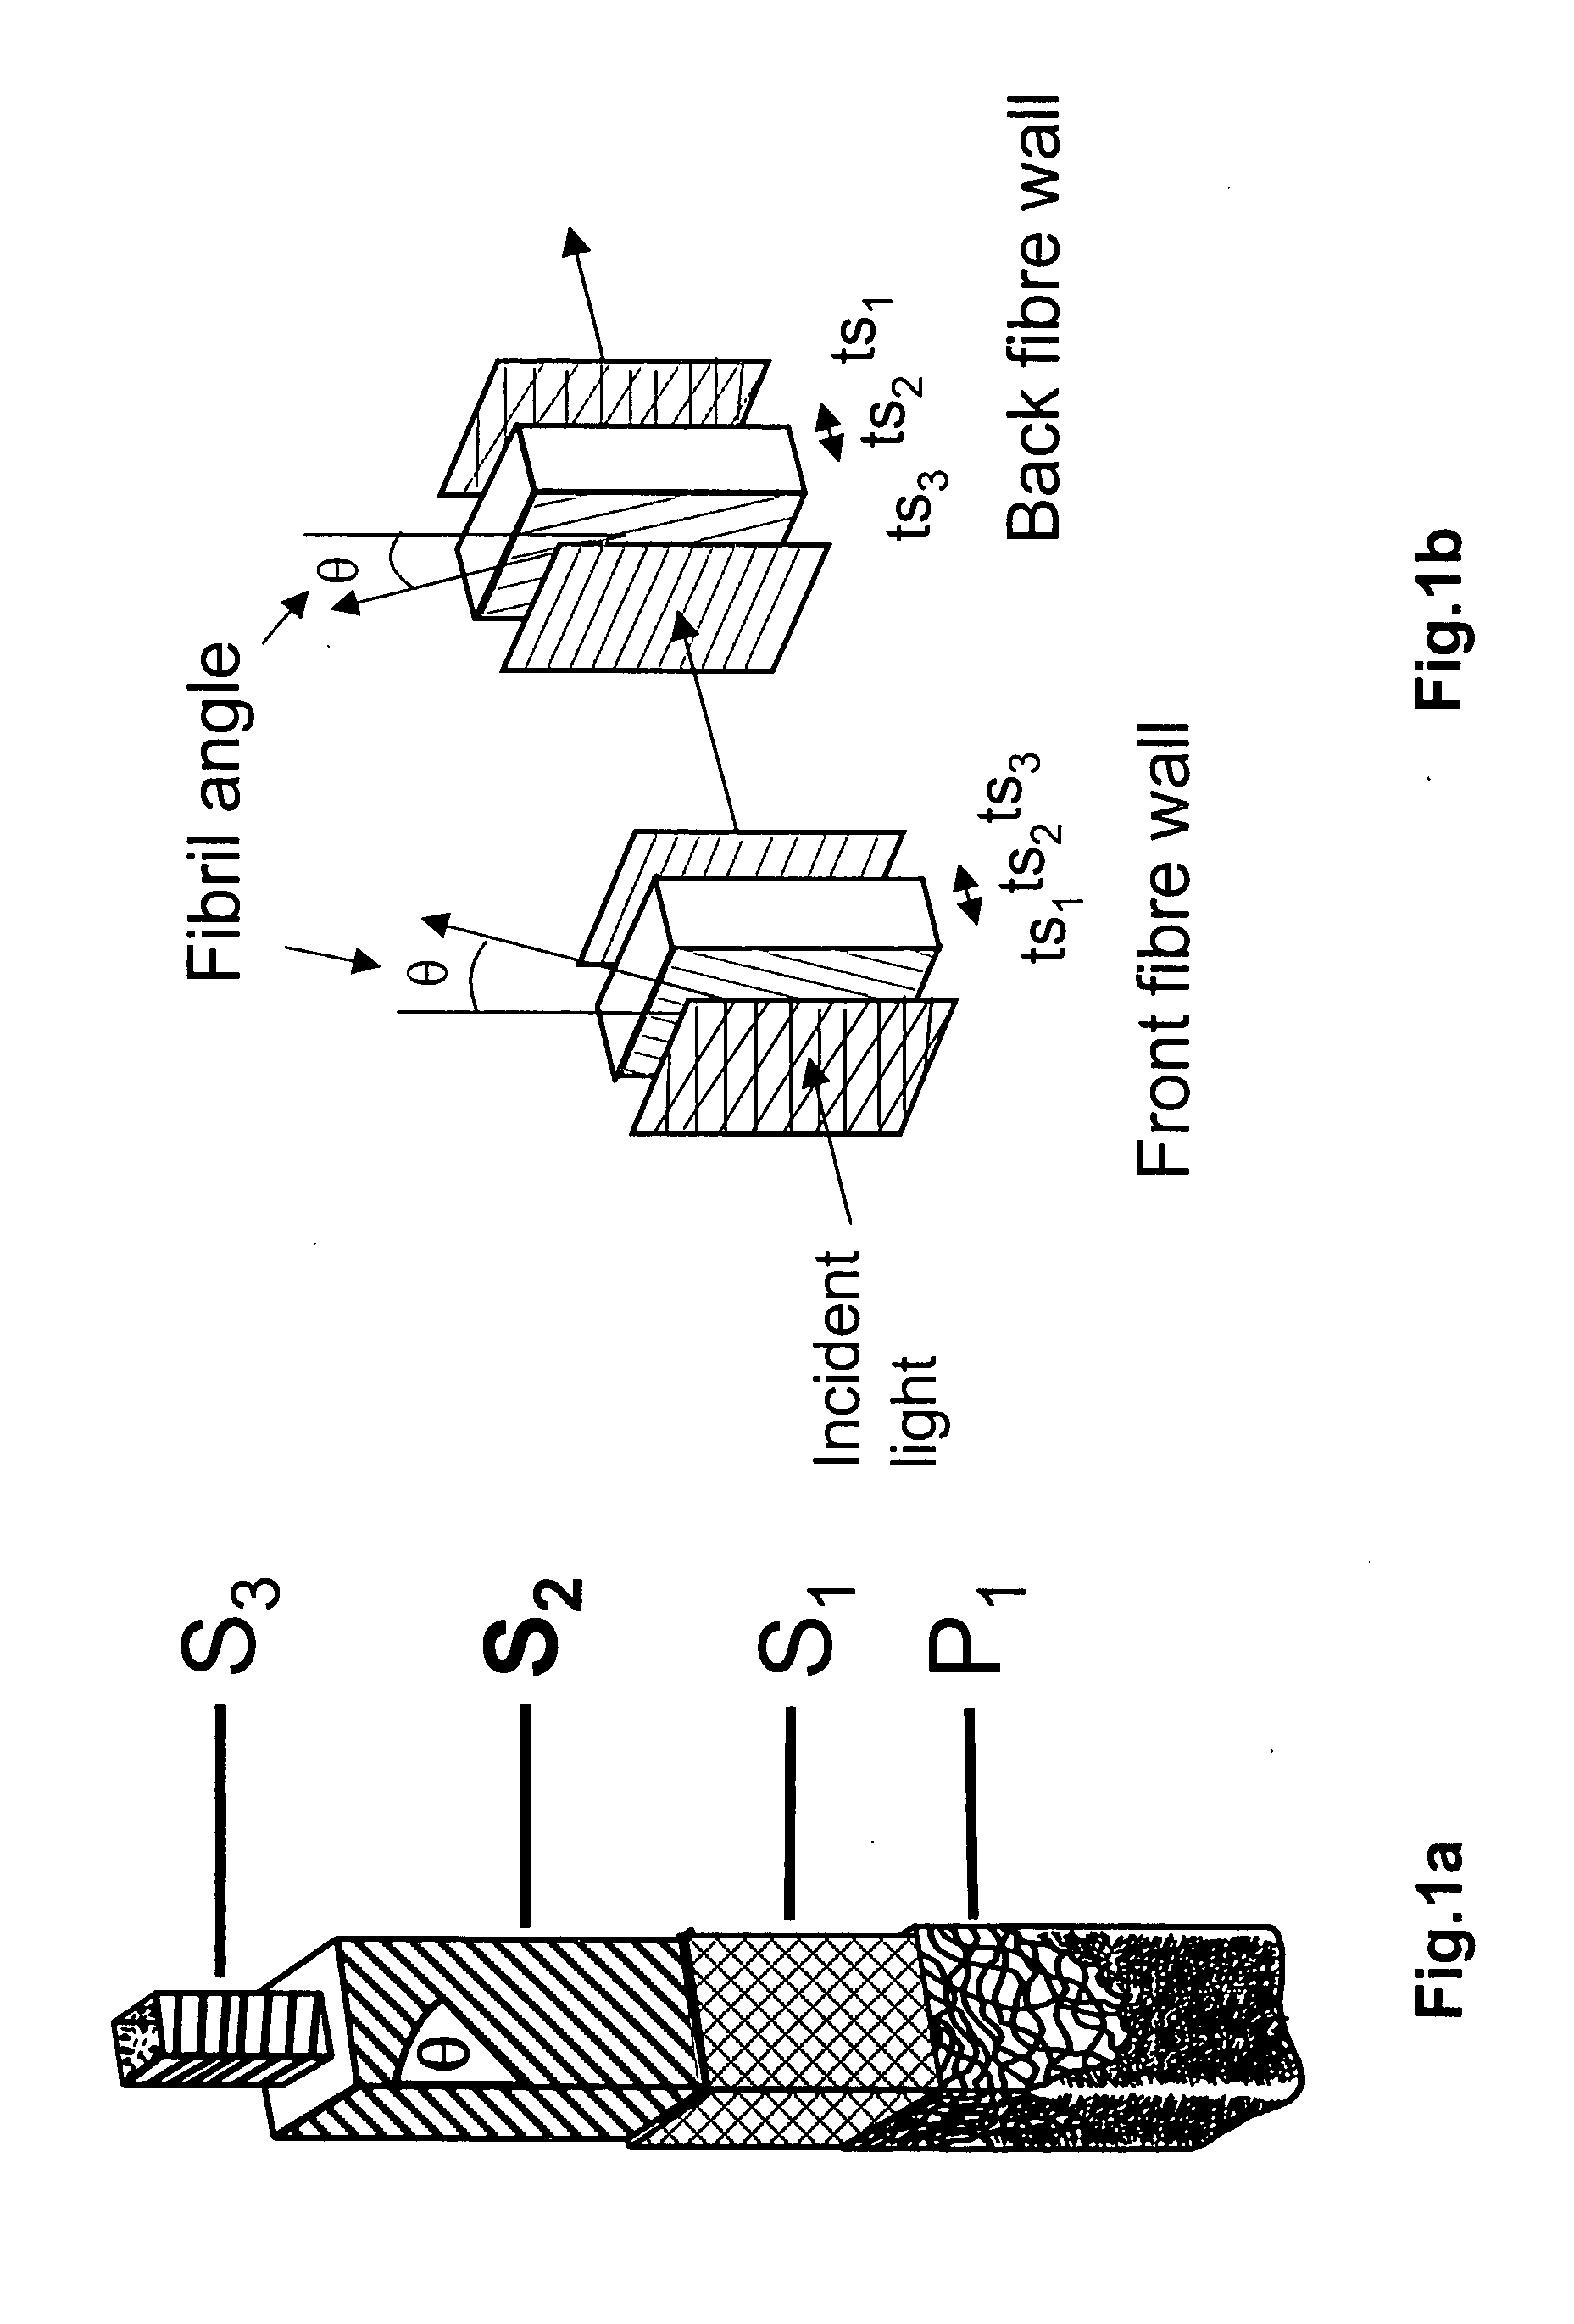 Circular polarized light method and device for determining wall thickness and orientations of fibrils of cellulosic fibres